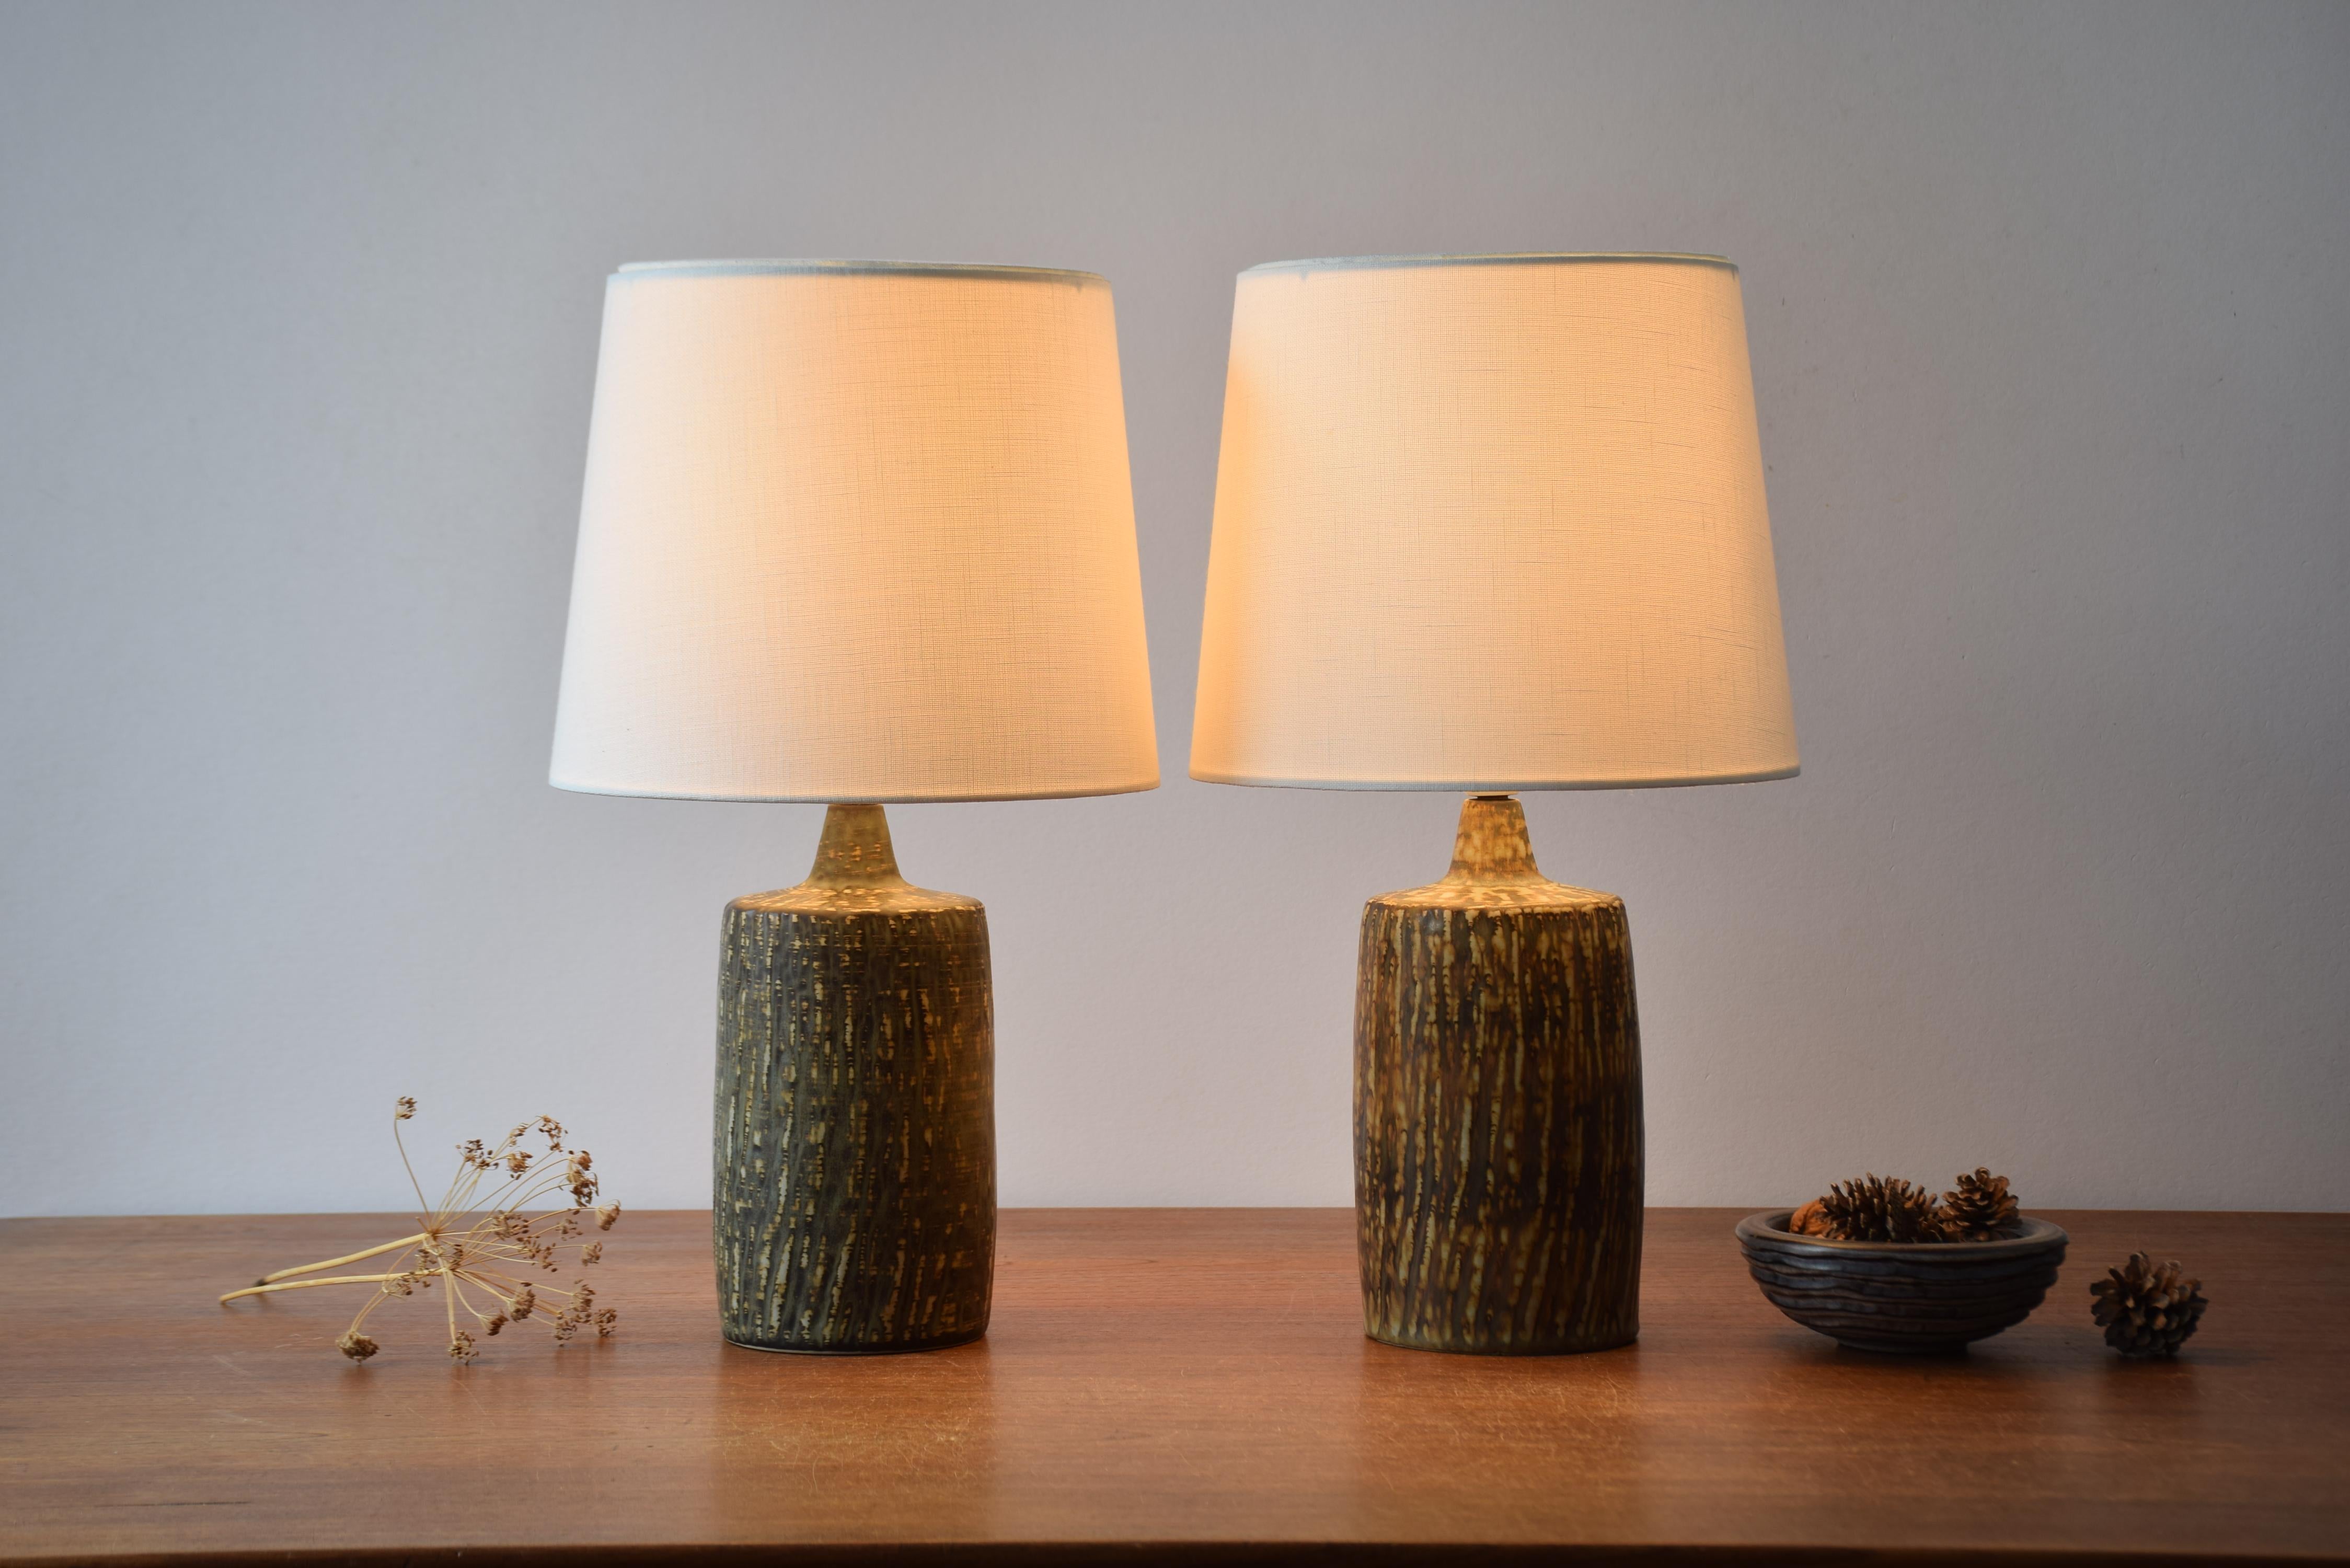 Pair of vintage ceramic table lamps by Gunnar Nylund for Rörstrand, Sweden.
They are part of the 